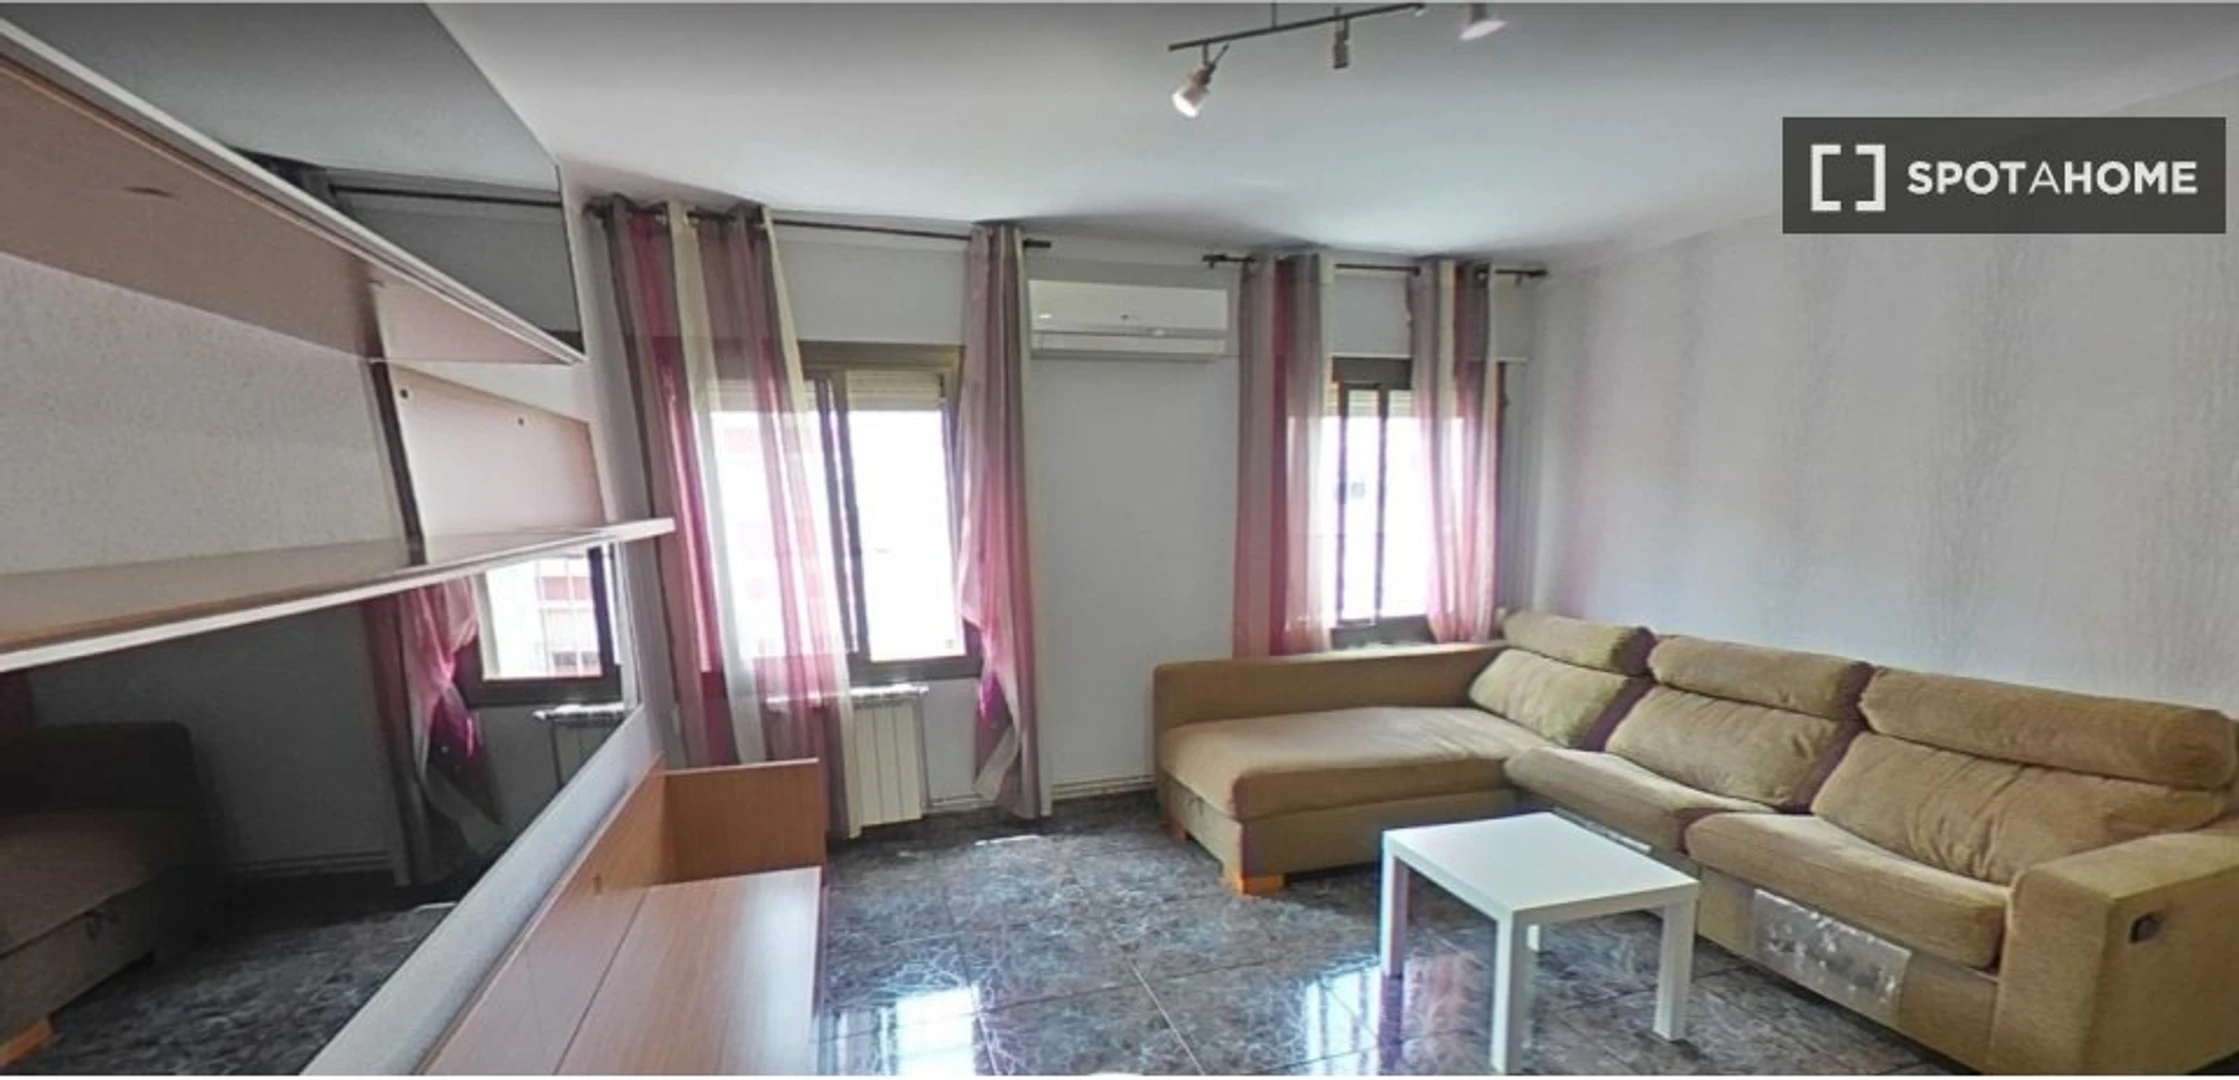 Entire fully furnished flat in Cerdanyola Del Vallès